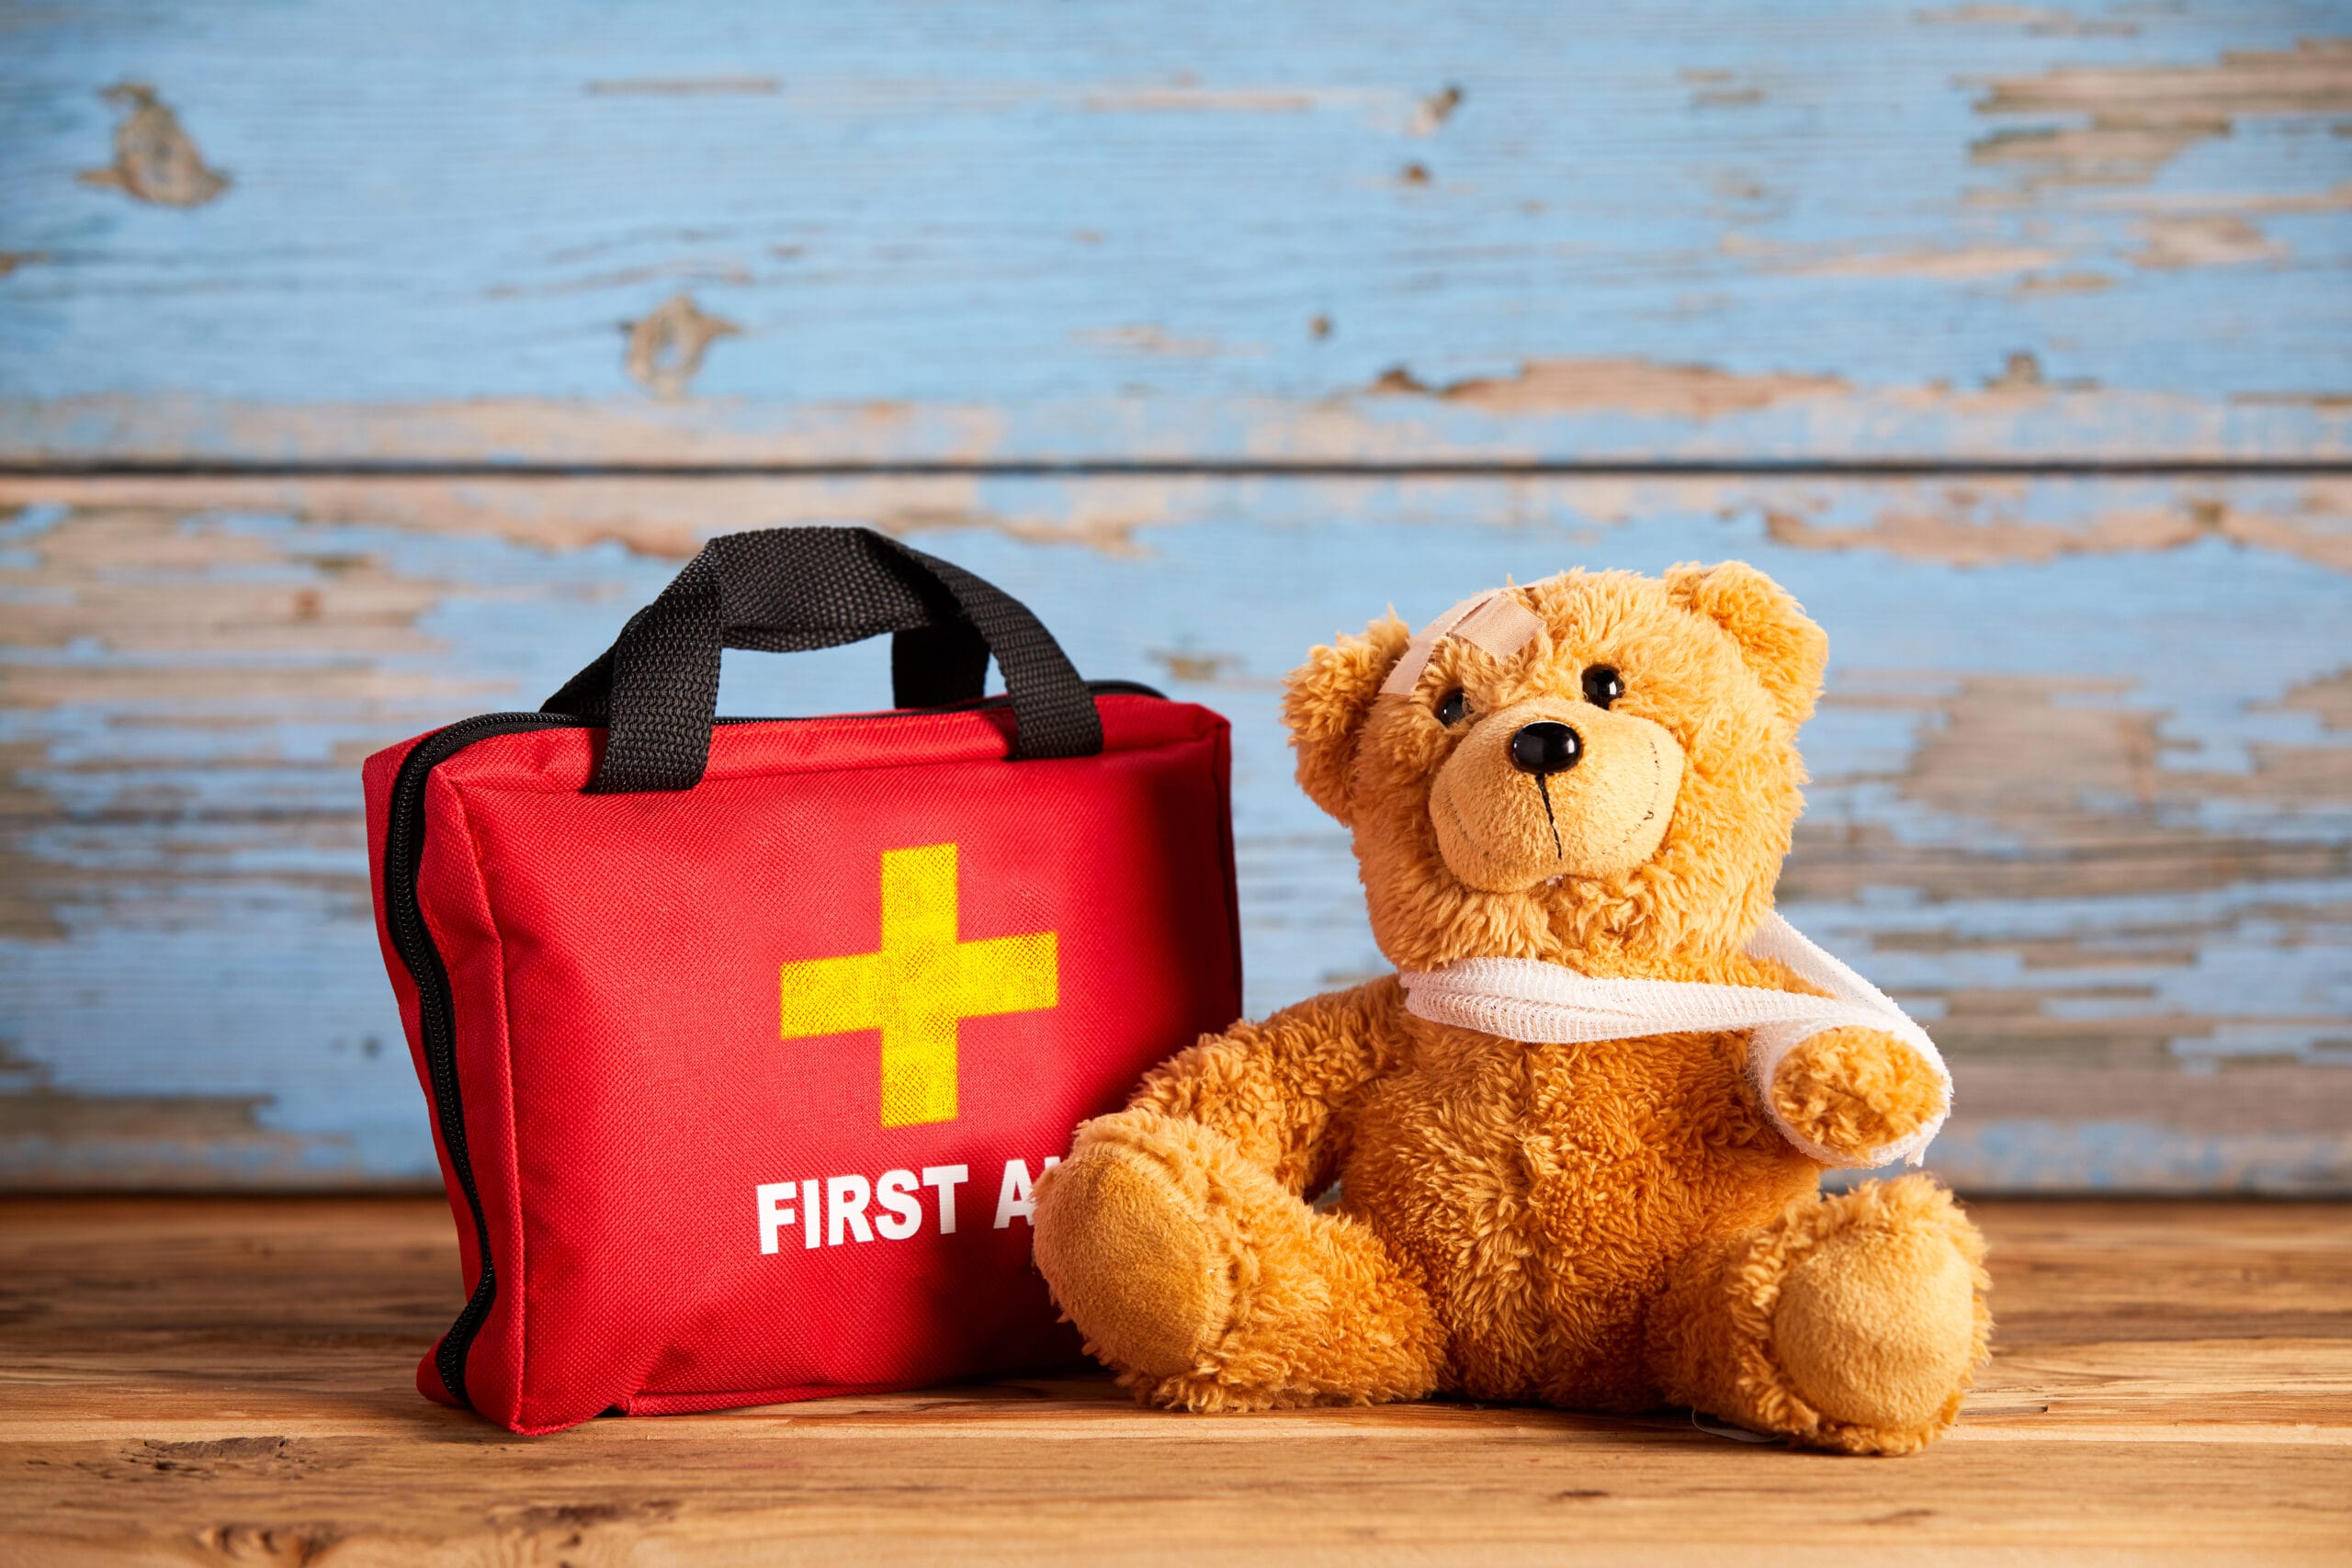 Little teddy bear with an injured arm in a sling sitting alongside a red First Aid bag on rustic wood in a concept of paediatric healthcare and emergency triage